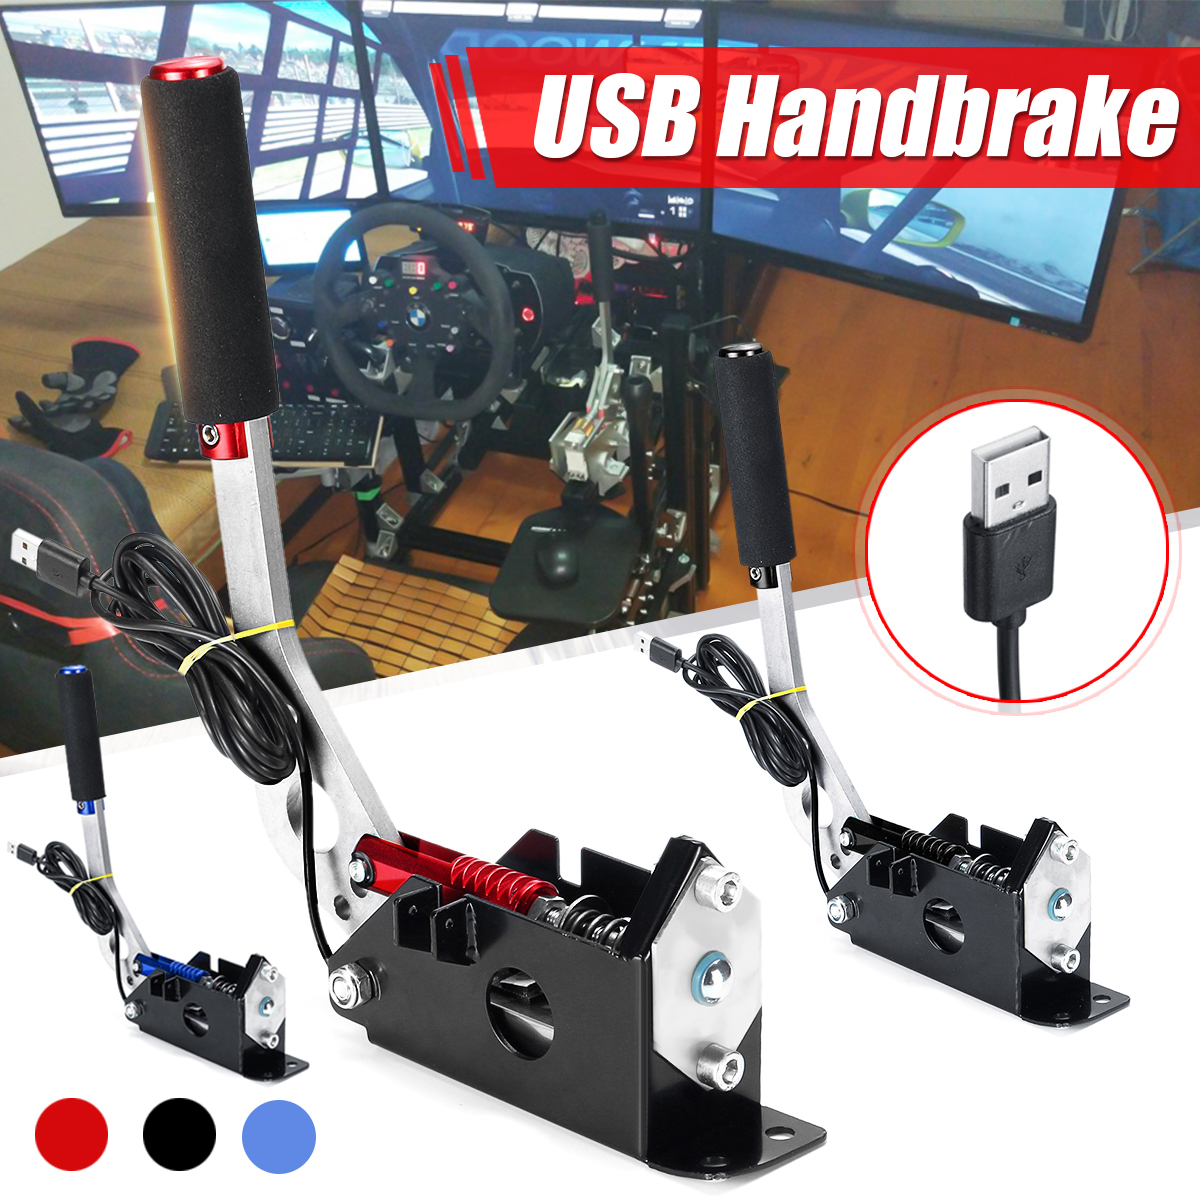 USB Handbrake Clamp PC Windows for Sim Game for Logitech G25 G27 G29 T500 T300 FANATECOSW for LFS DIRT RALLY history & Review AliExpress Seller - Hcalory Official